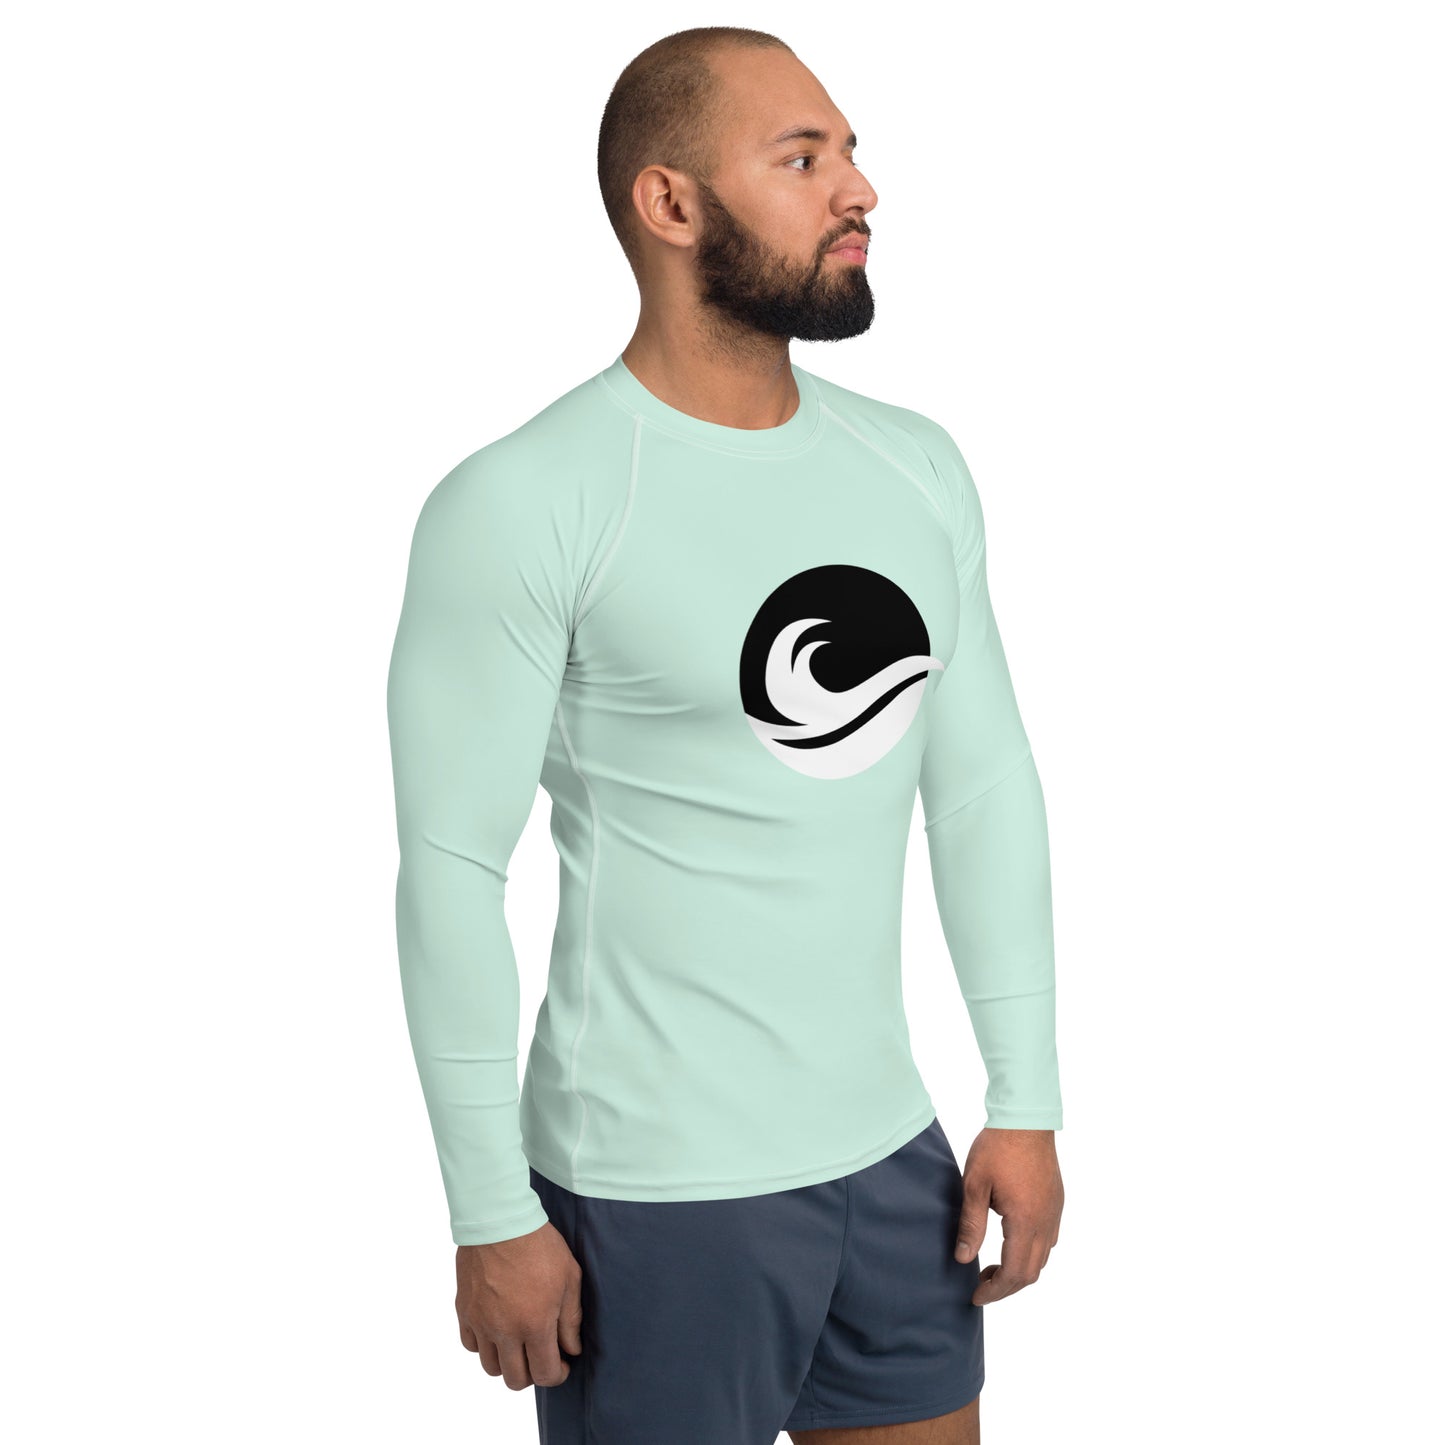 Surf in Style: Men's High-Performance Rash Guard - Minty Wave